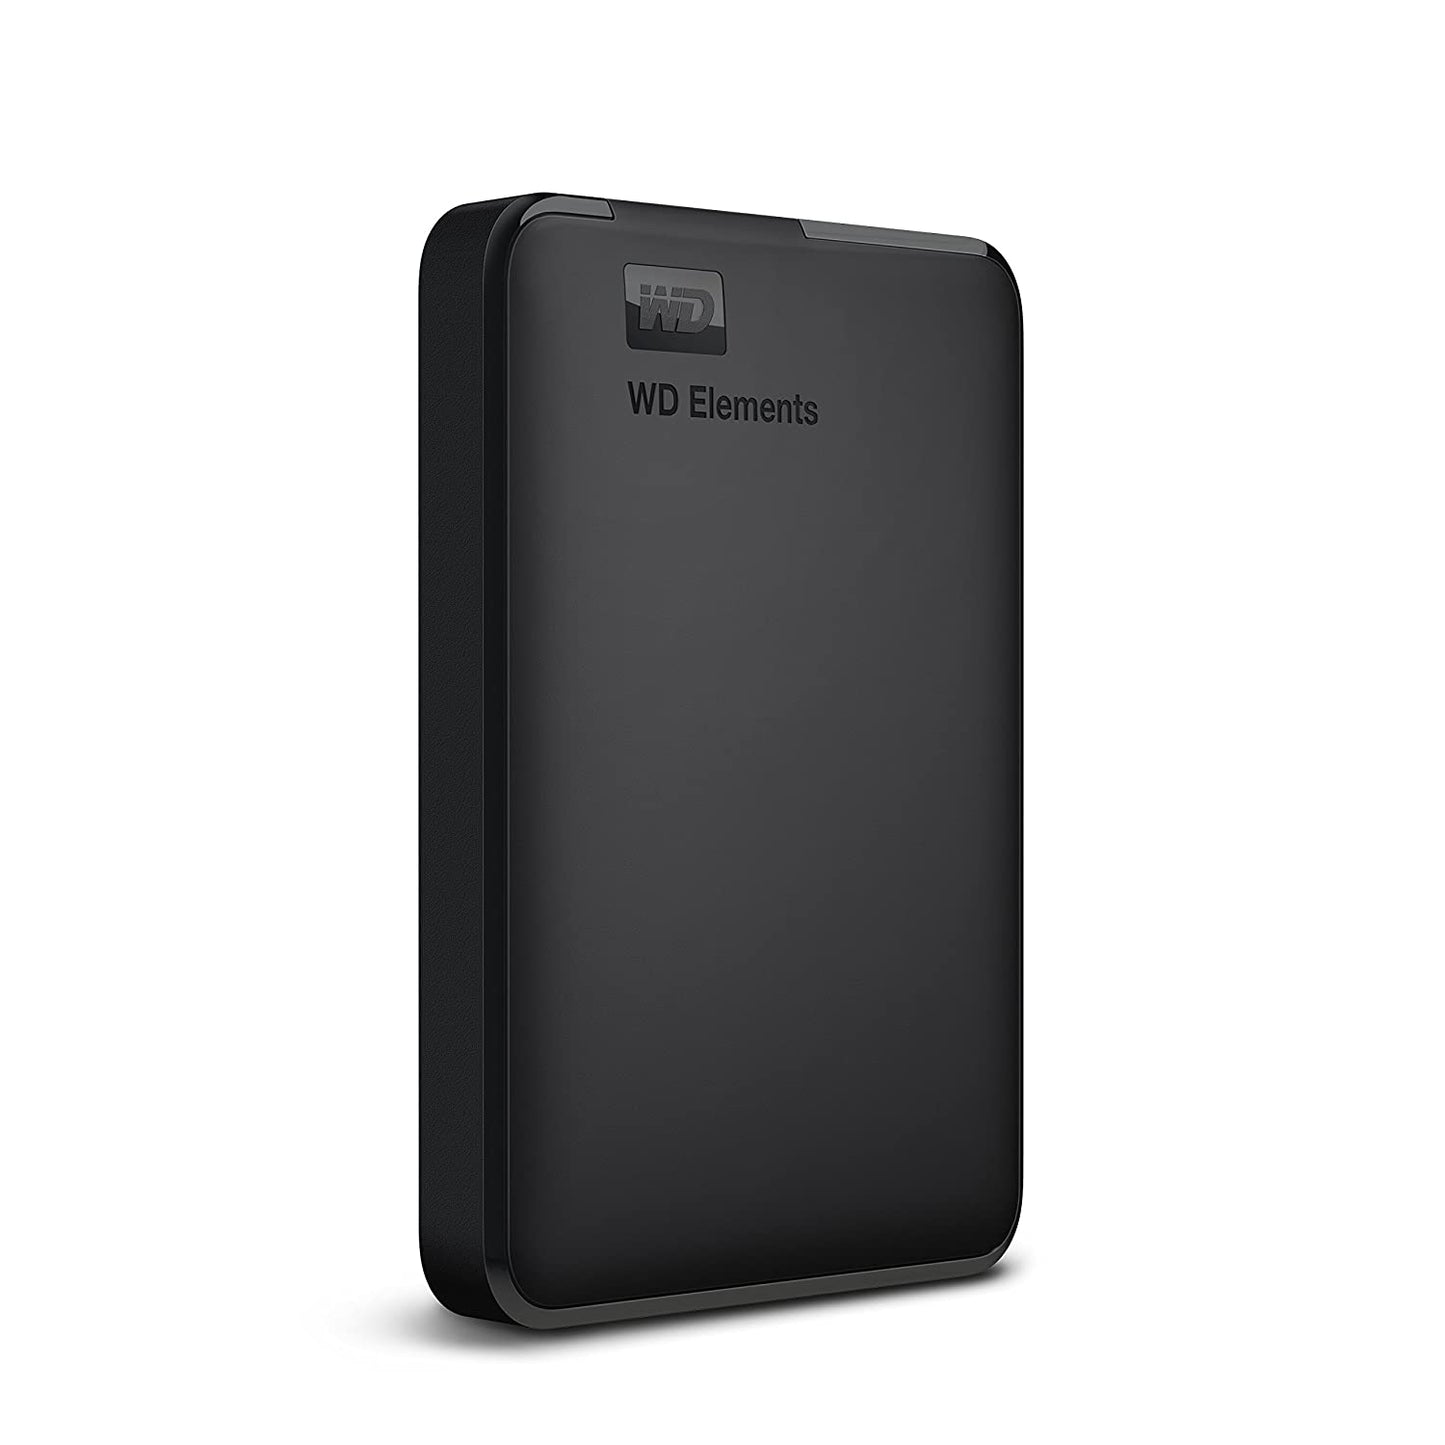 Western Digital WD 1.5TB Elements USB 3.0 Portable External Hard Drive Compatible with PC, PS4 & Xbox